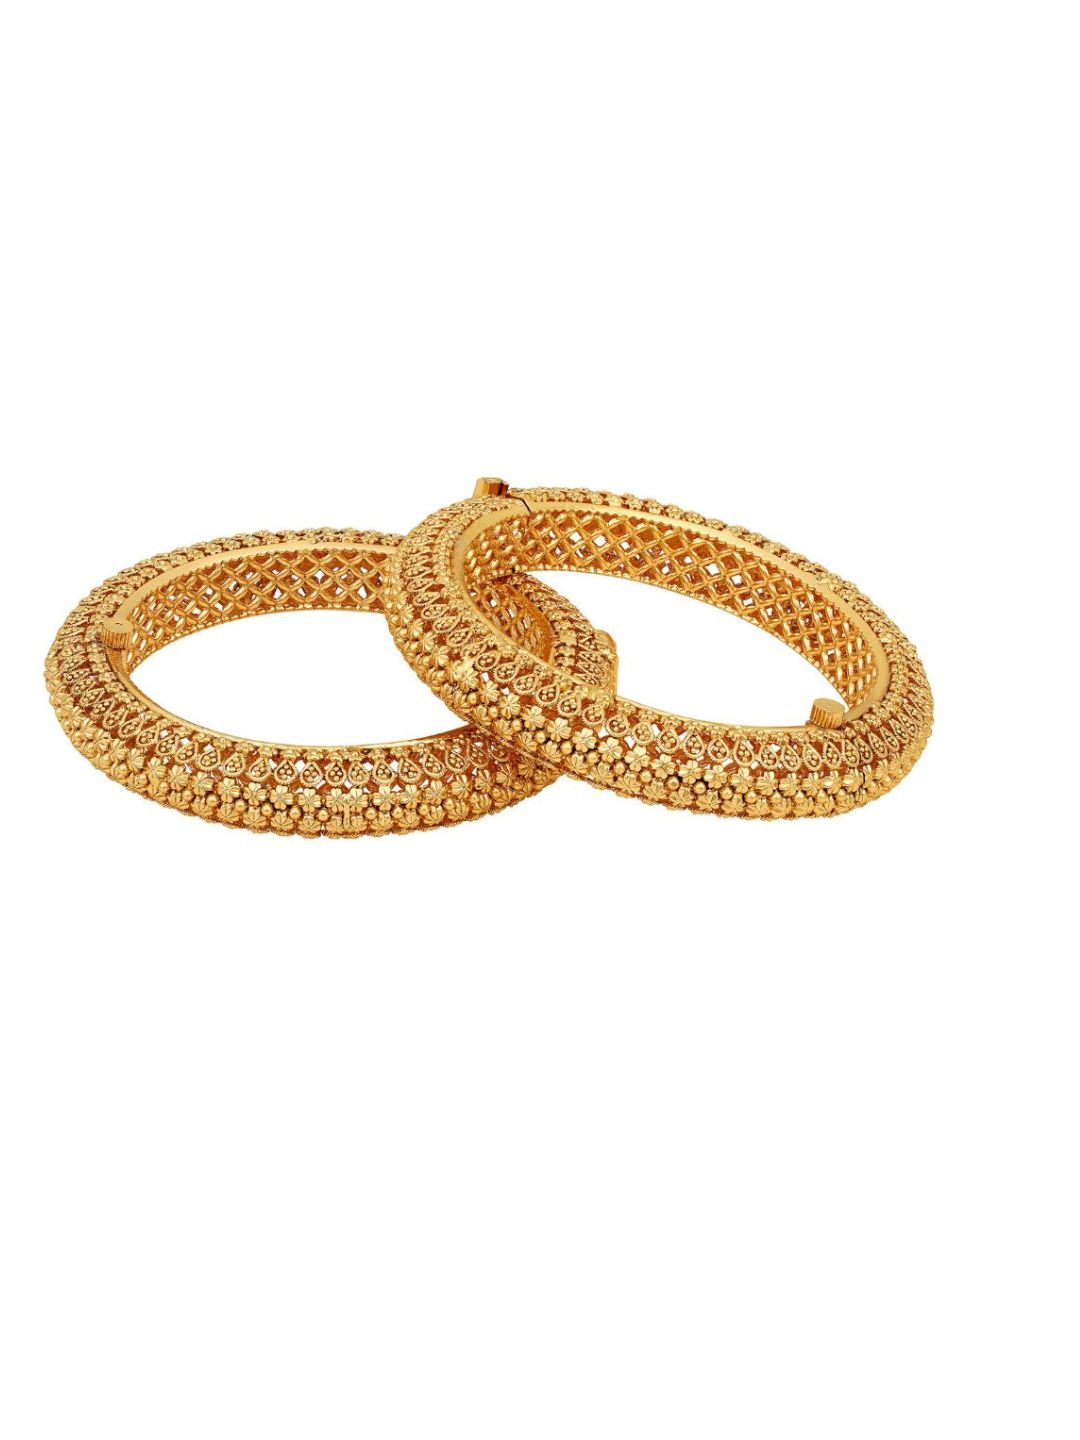 Placeholder ACCESSHER Set of 2 Gold Plated Traditional Rajwadi Jewellery Inspired Ethnic Filigree Style Screw Closure Bangles/Kada/Festive Bangles for Women and Girls